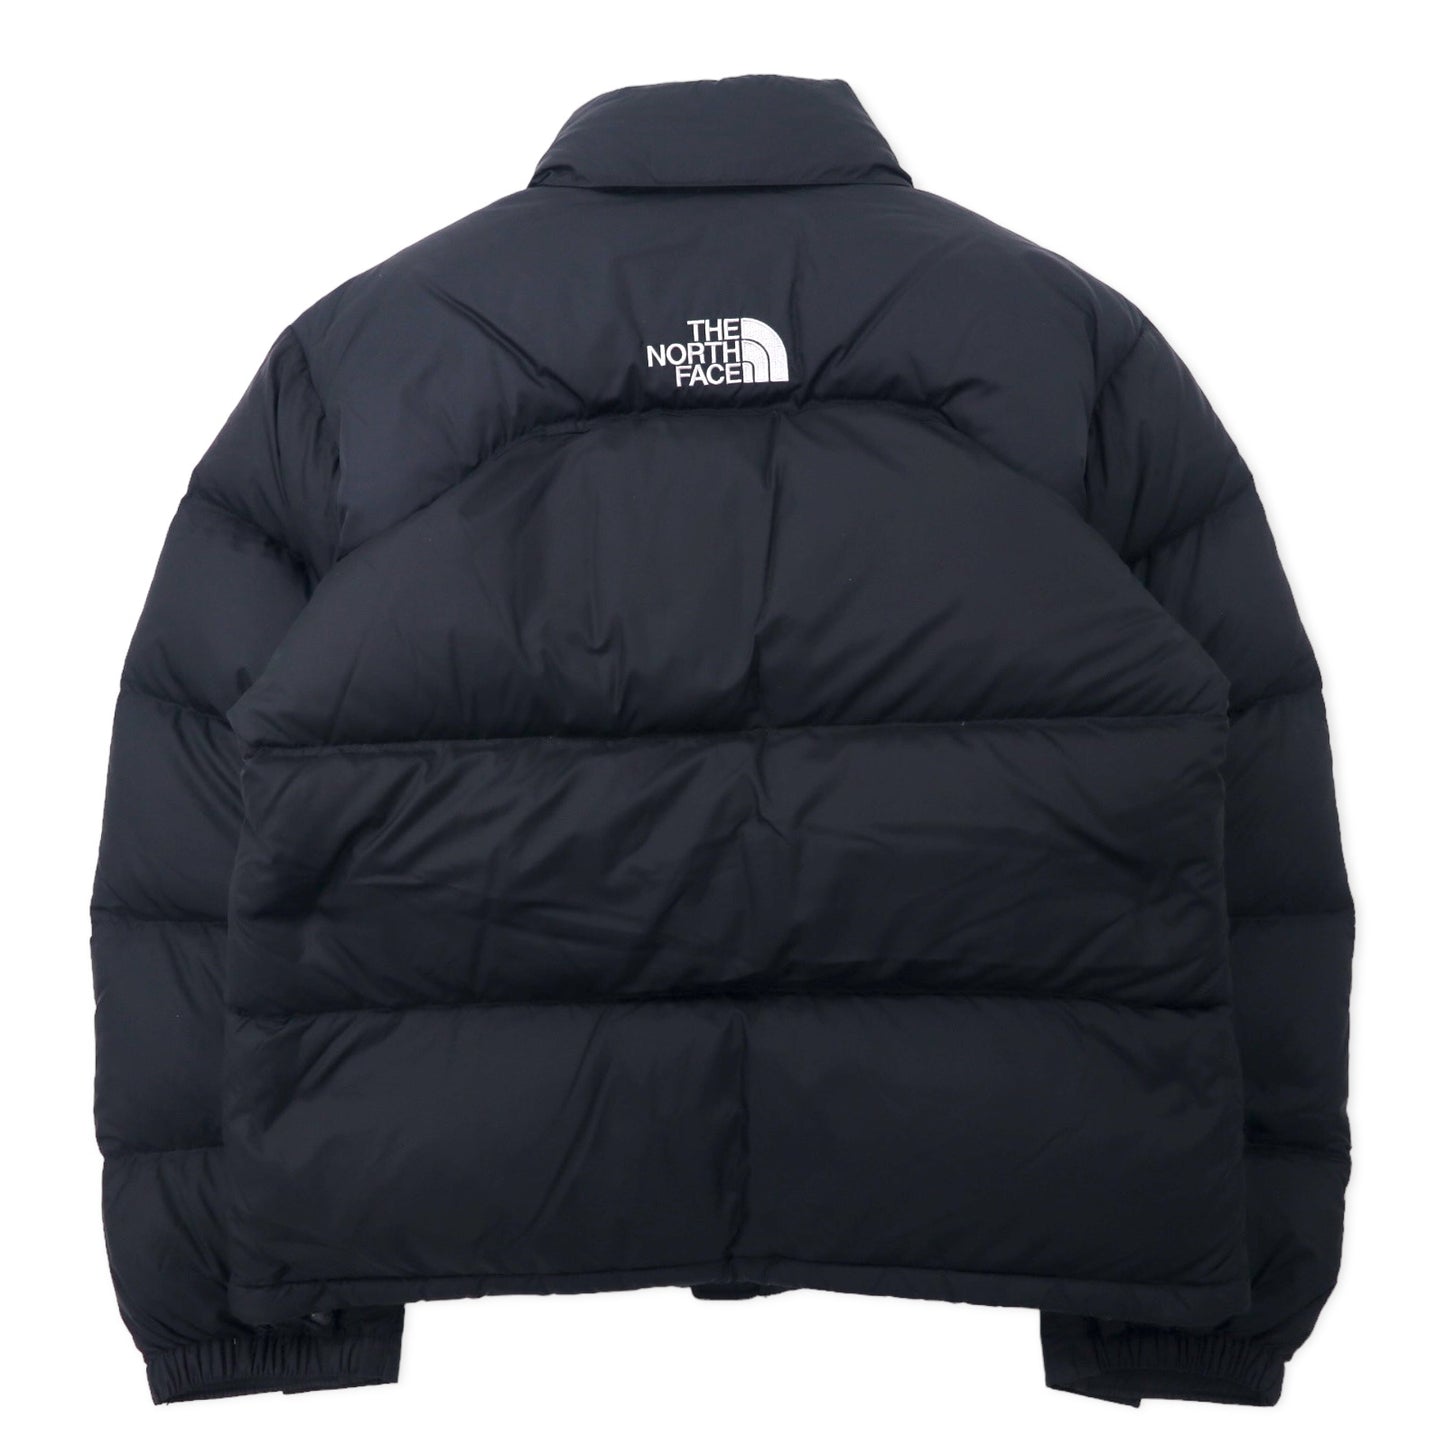 THE NORTH FACE Center logo embroidery Nupushi PUFFER JACKET 700 ...